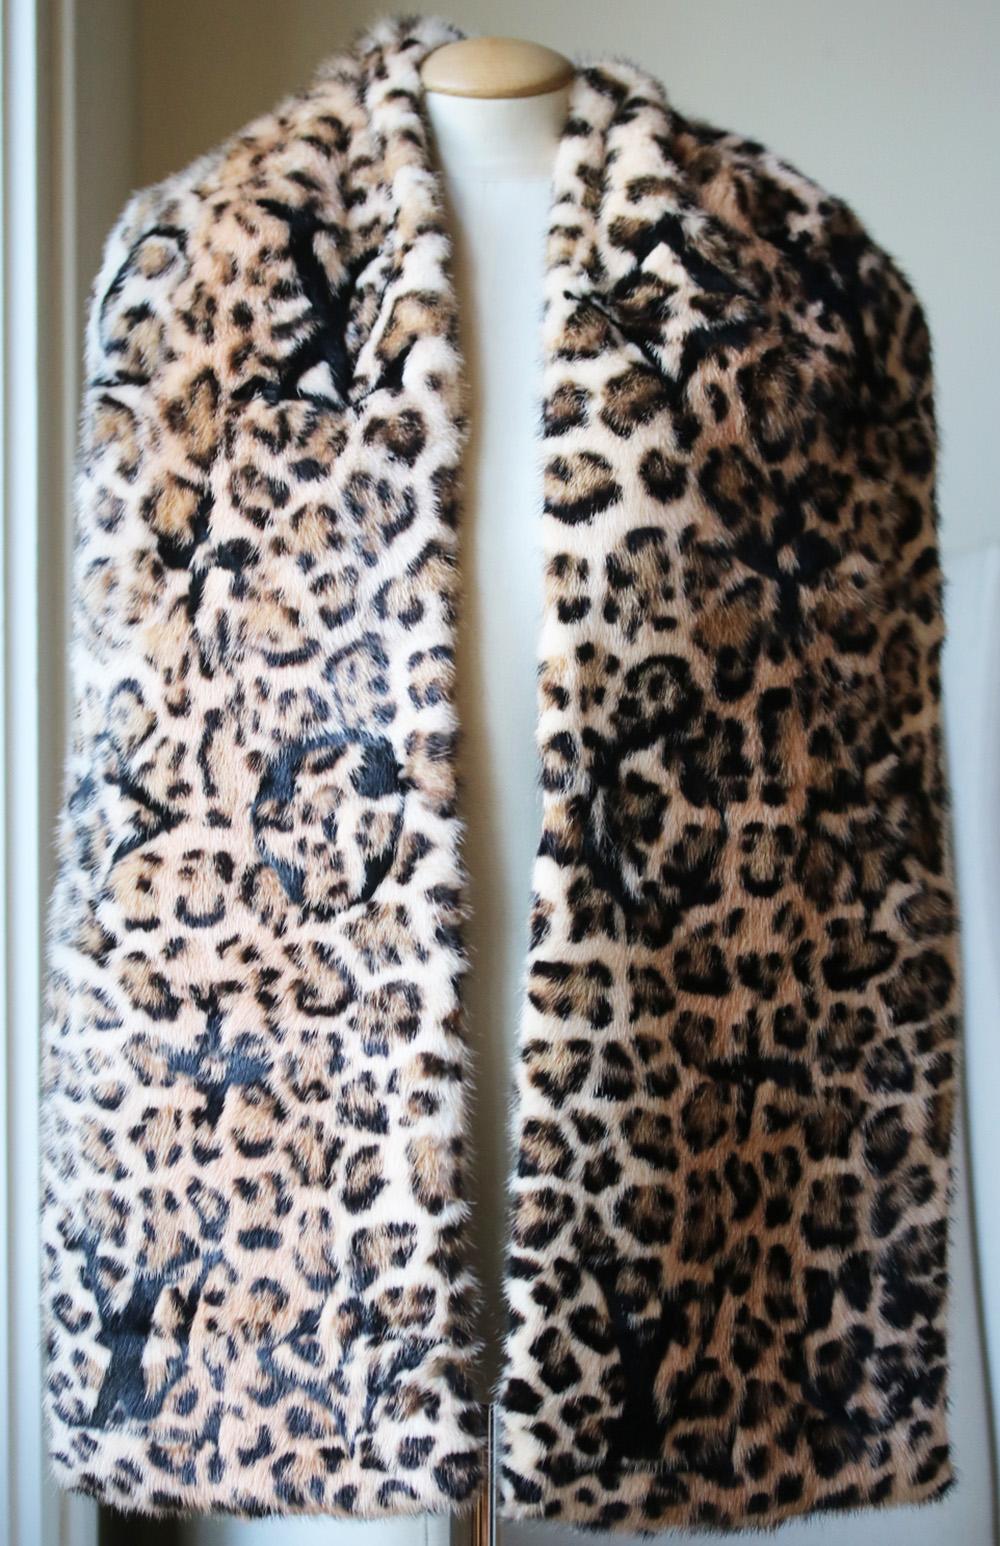 This lush, lustrous mink scarf features a leopard-print pattern inlaid with Monogram motifs. Lined in silk and generously sized, it envelops the wearer in pure luxury. An exceptional piece, it will delight connoisseurs of fine fur craftsmanship.